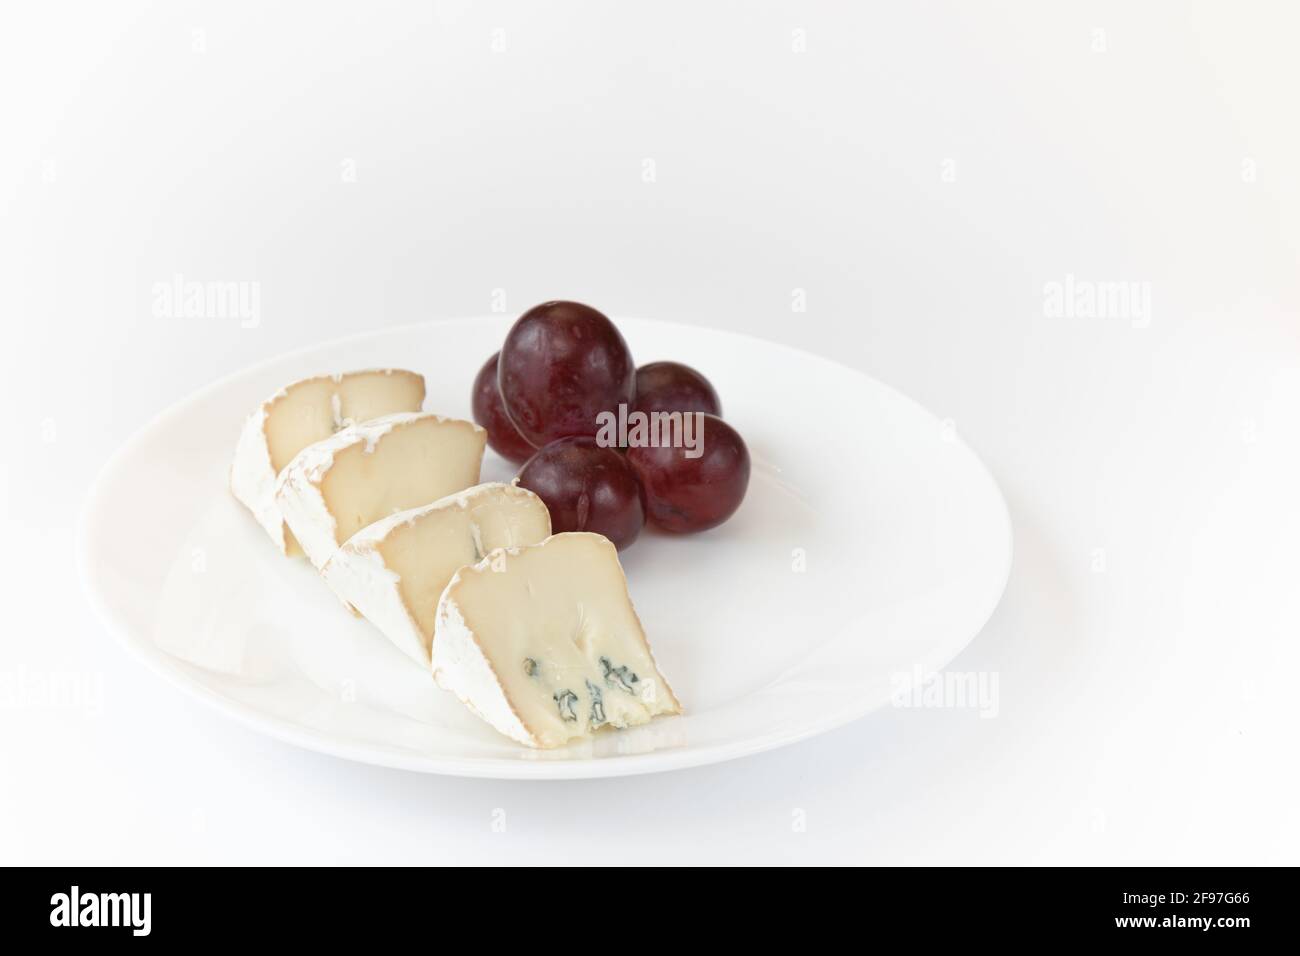 pieces of camembert or brie cheese with red grapes on plate isolated on white background, soft cheese covered with edible white mold view from above, Stock Photo